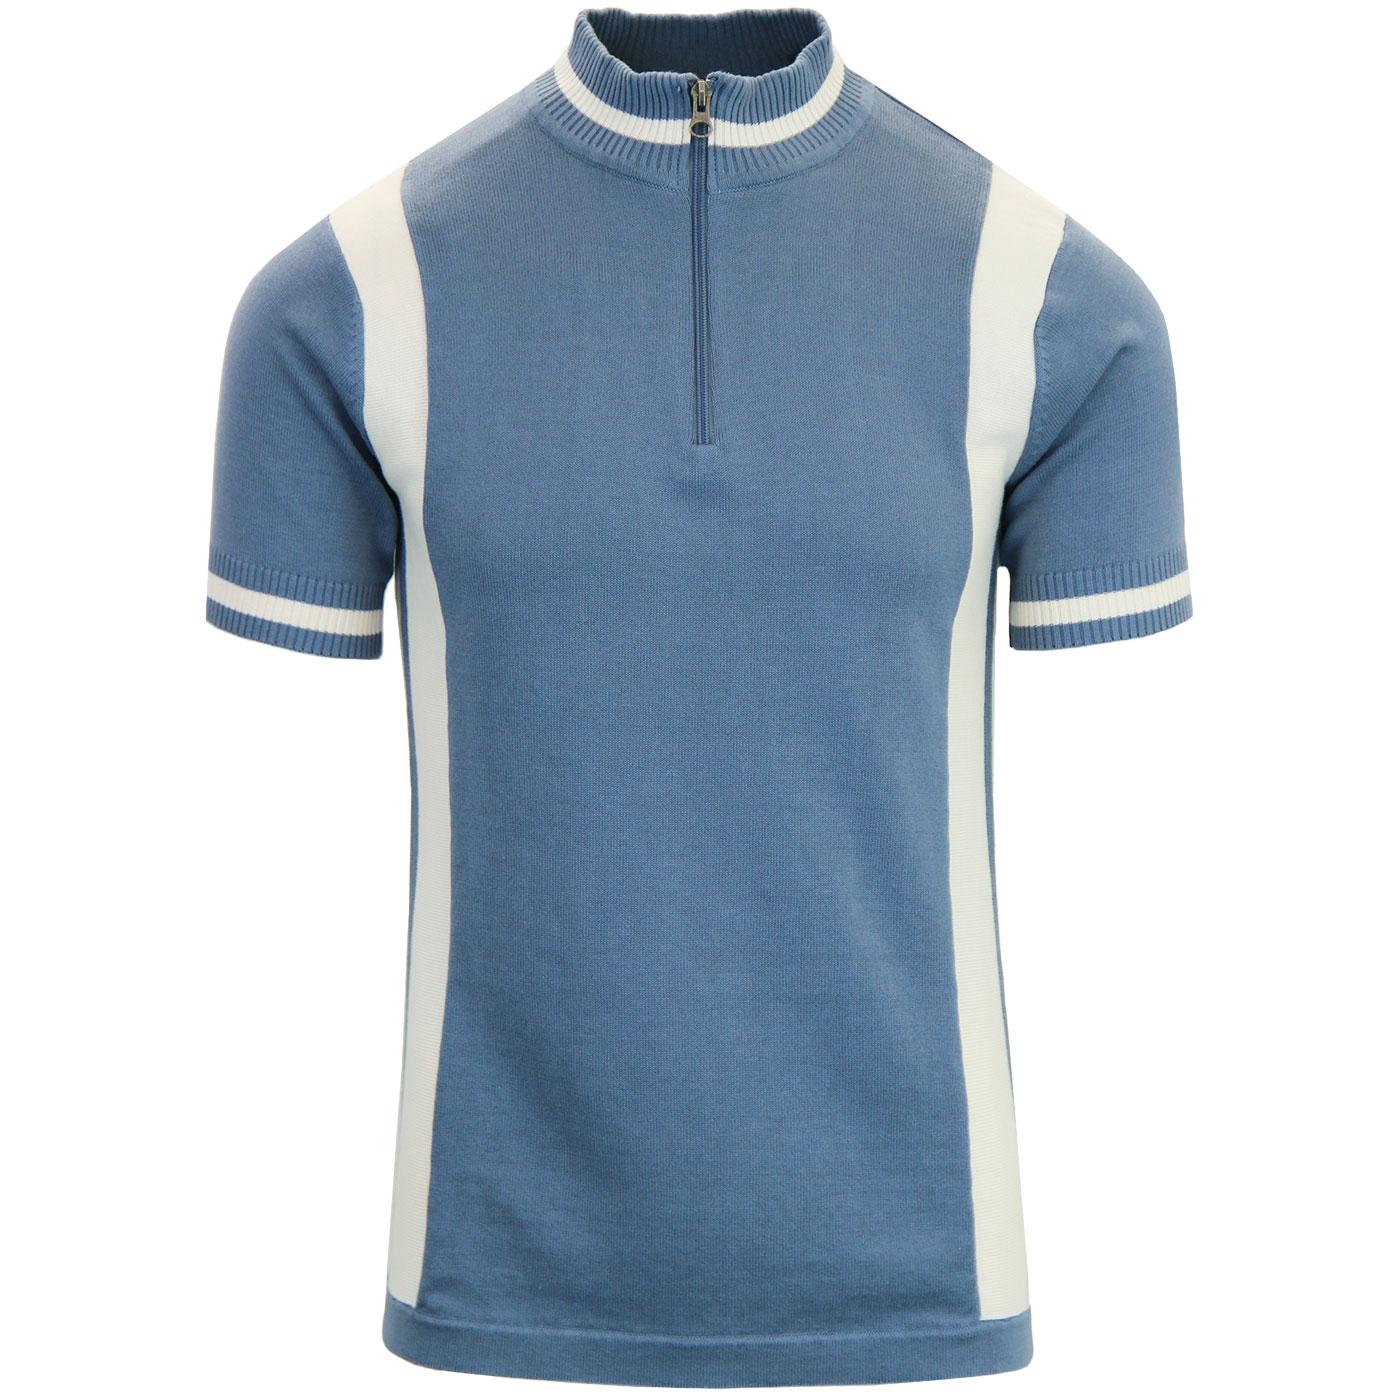 Mens Black Retro Stripe Knitted Cycling Top 